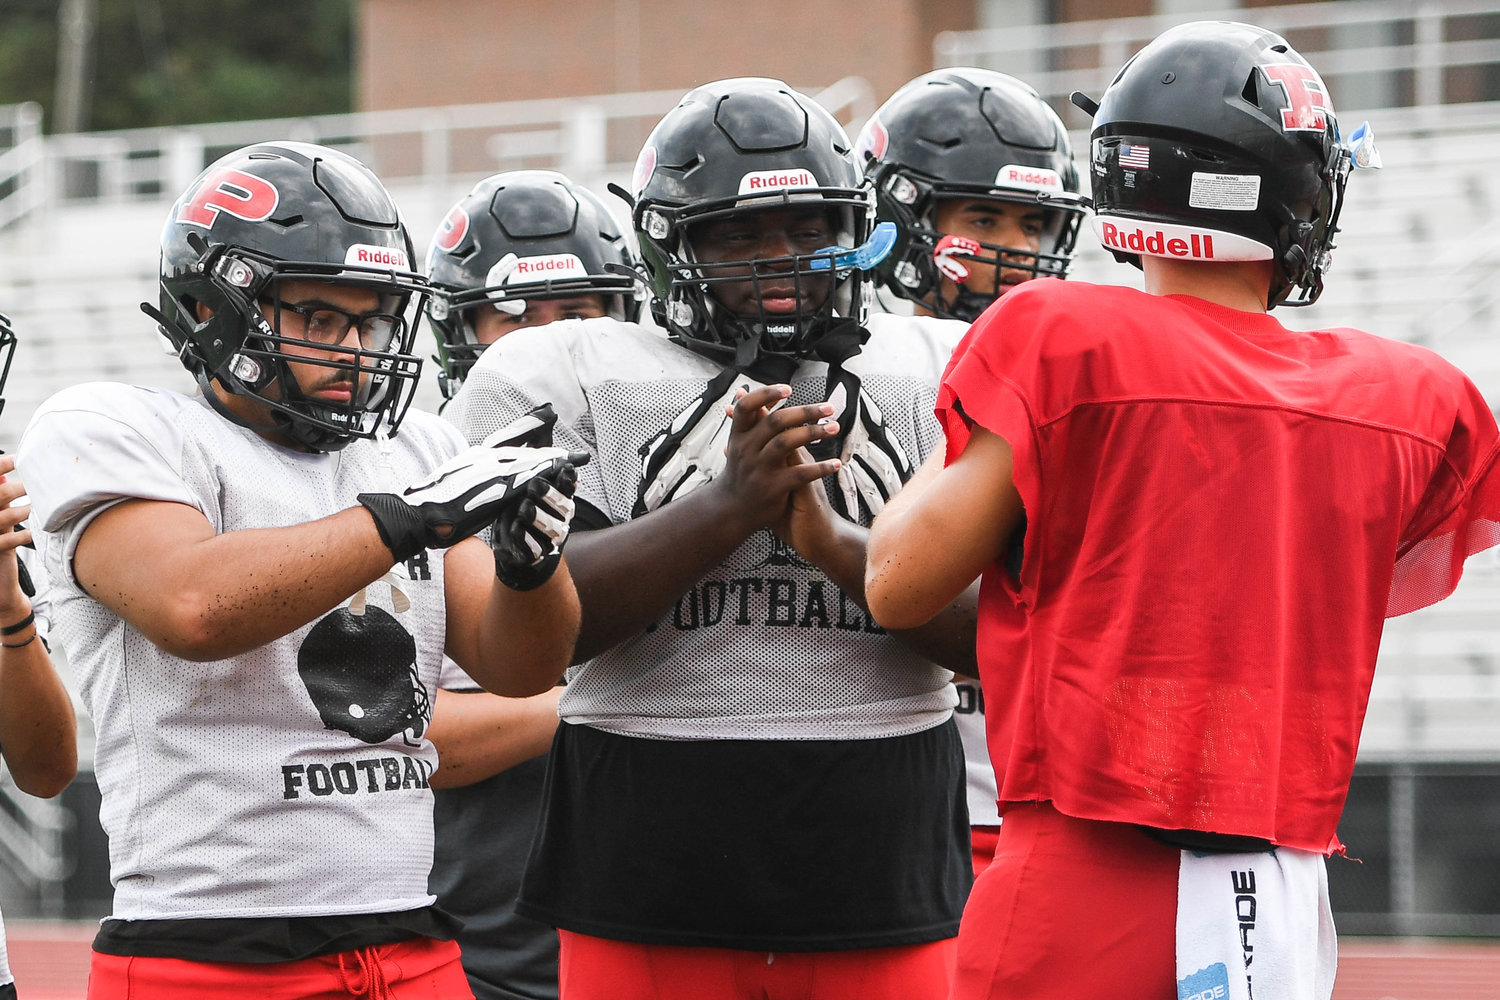 Proctor players break a huddle during practice on Aug. 30 after a play is called by senior quarterback Todd Abraham, who is set to be the team’s starter this season.